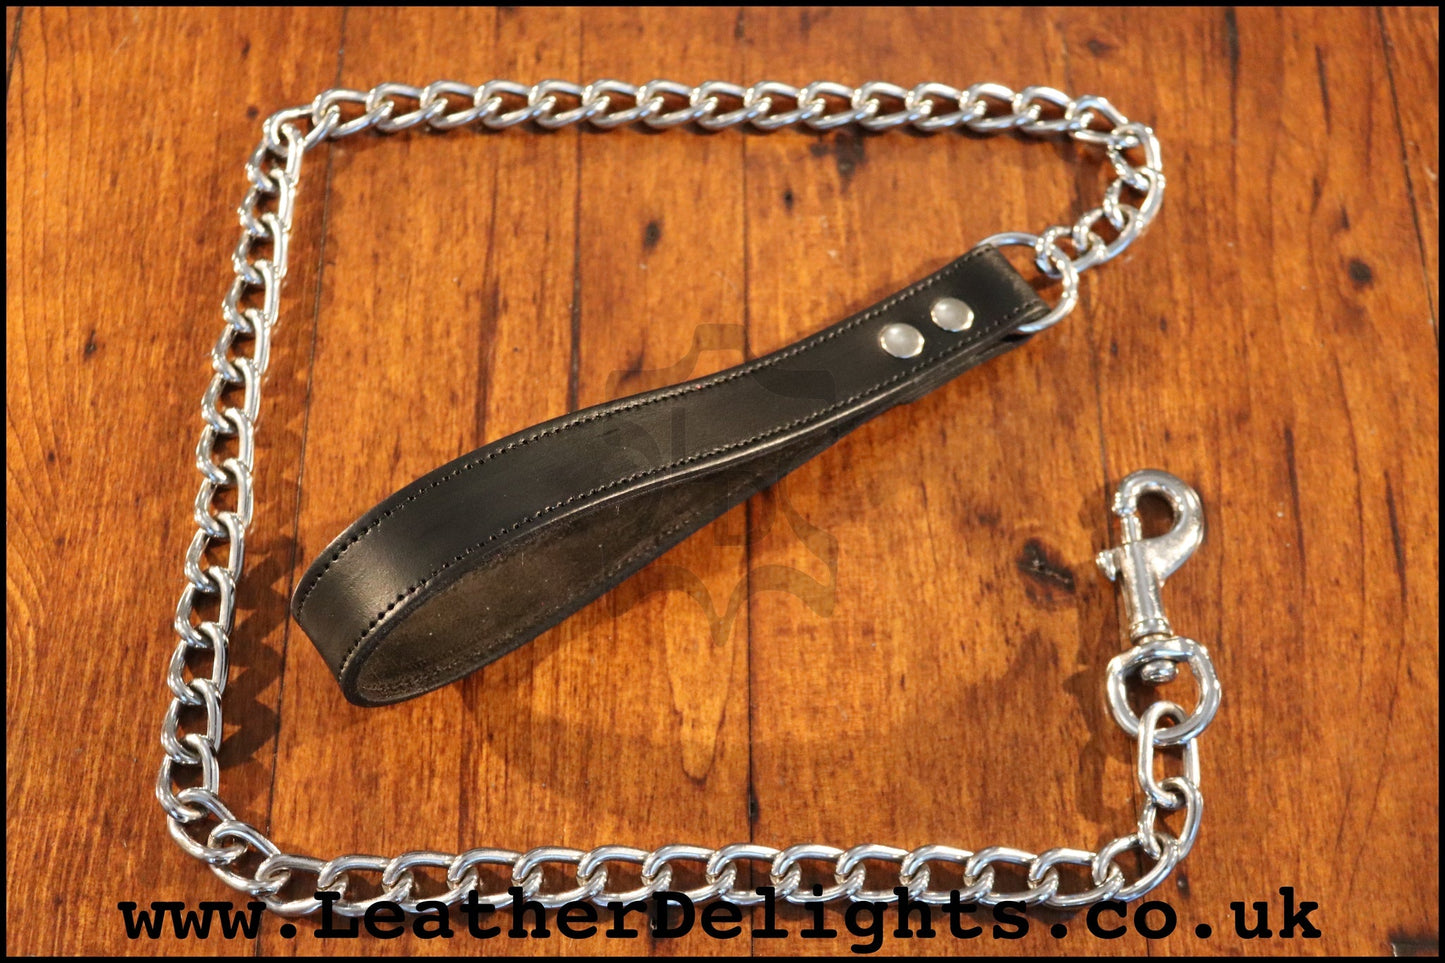 Chain Lead with Leather Handle - Leather Delights